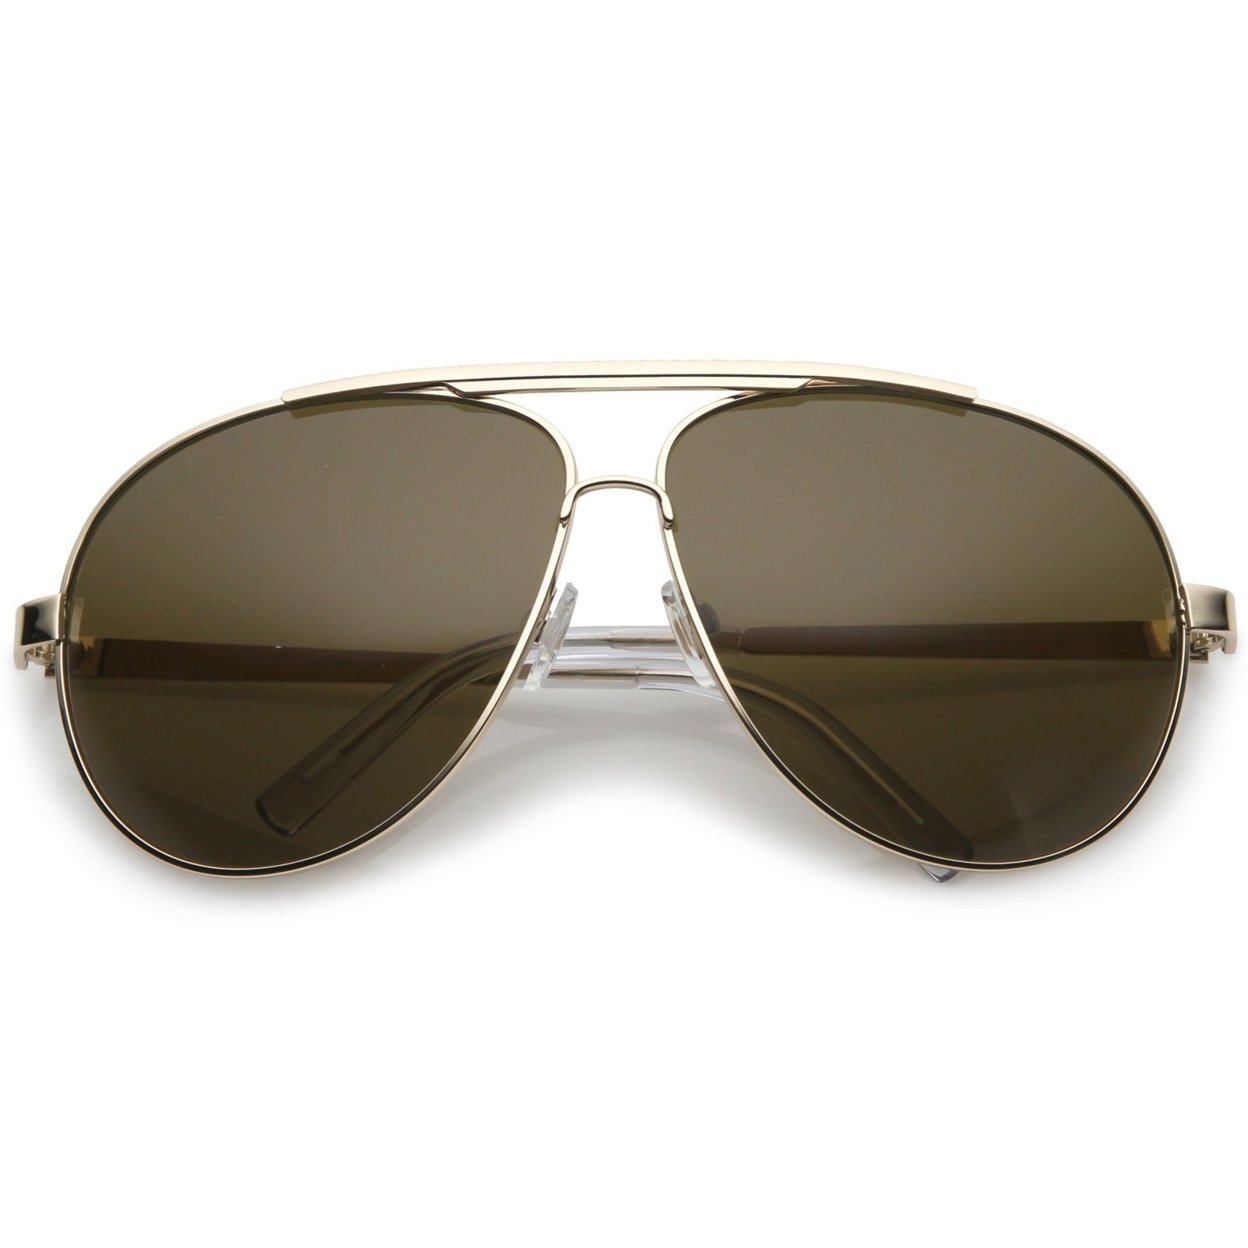 Premium Oversize Metal Aviator Sunglasses With Double Nose Bridge And Flat Top 67mm - Gold / Brown